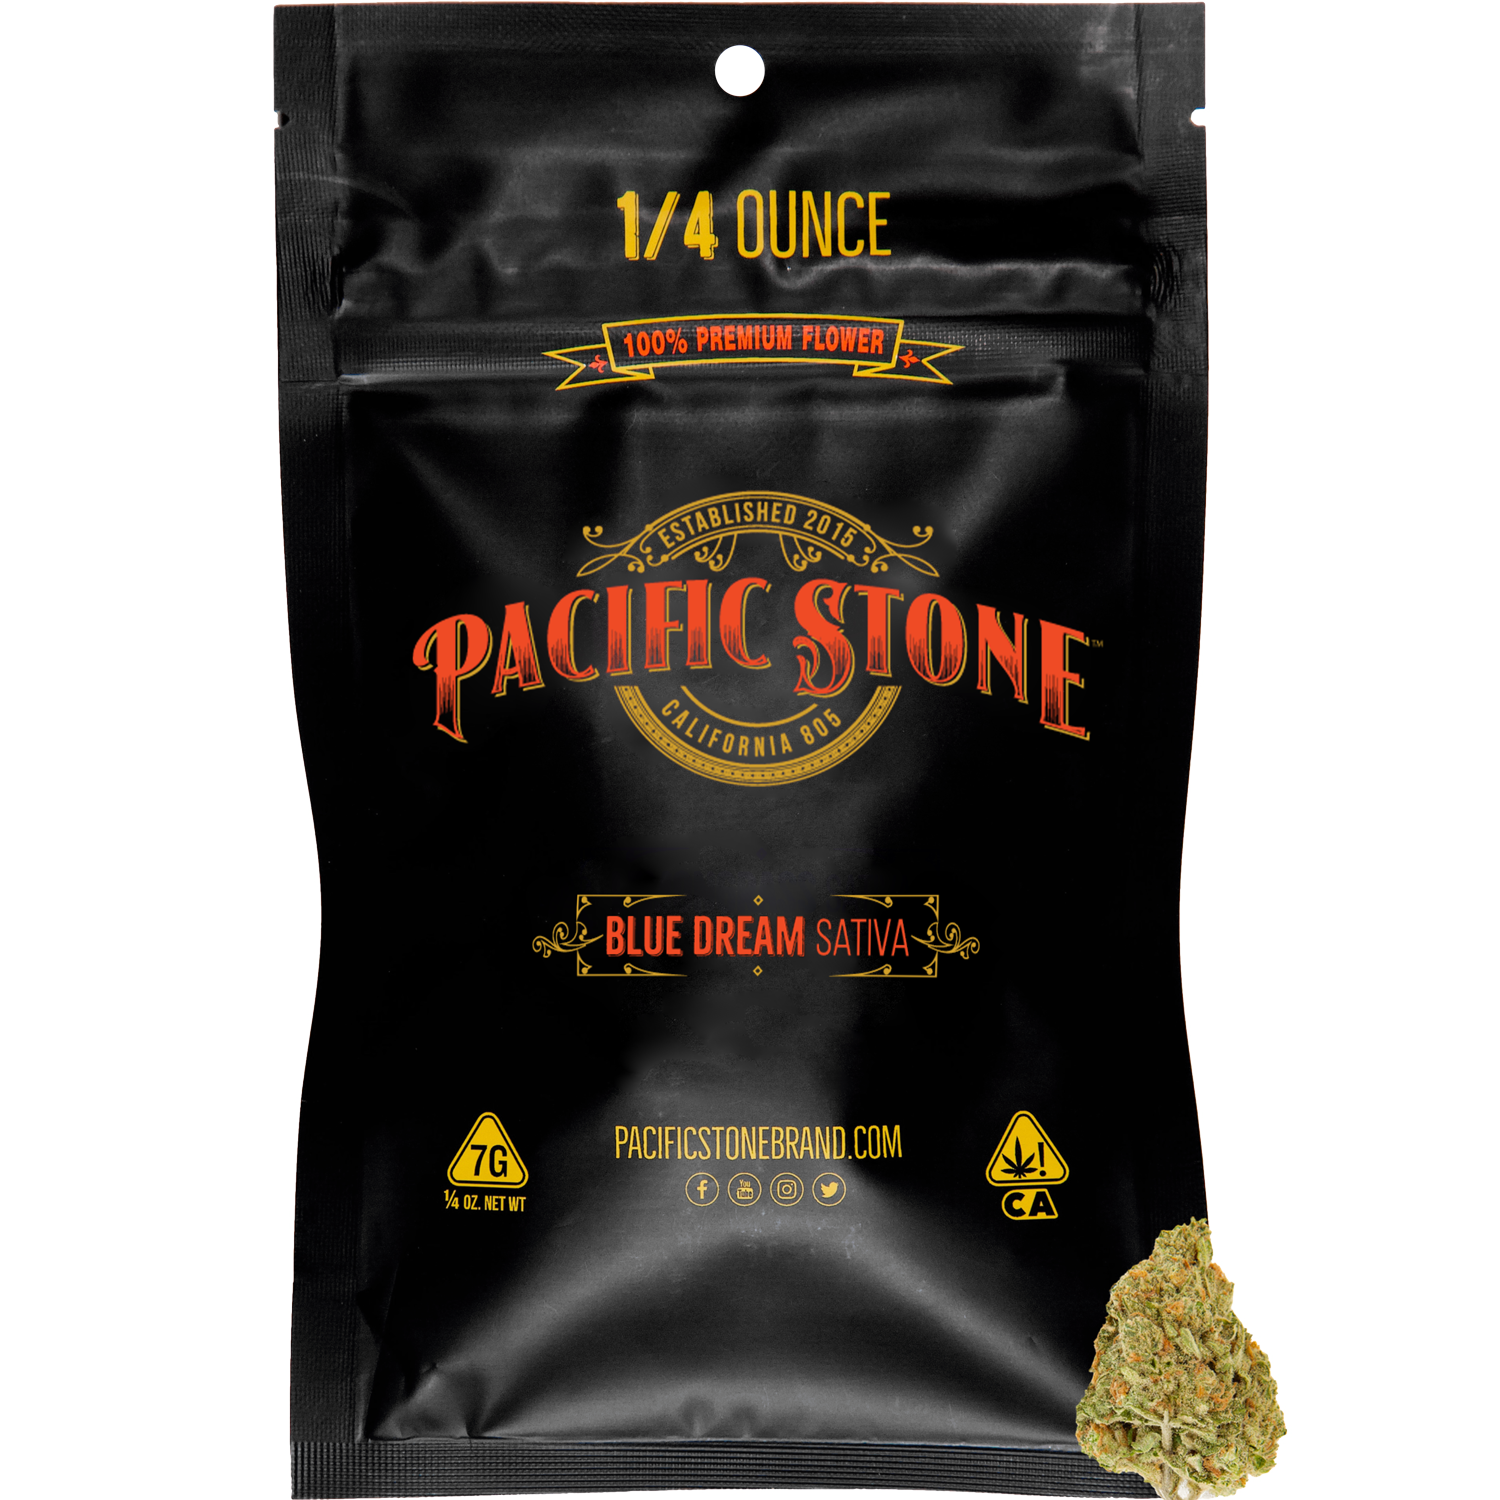 A photograph of Pacific Stone Flower 7.0g Pouch Sativa Blue Dream